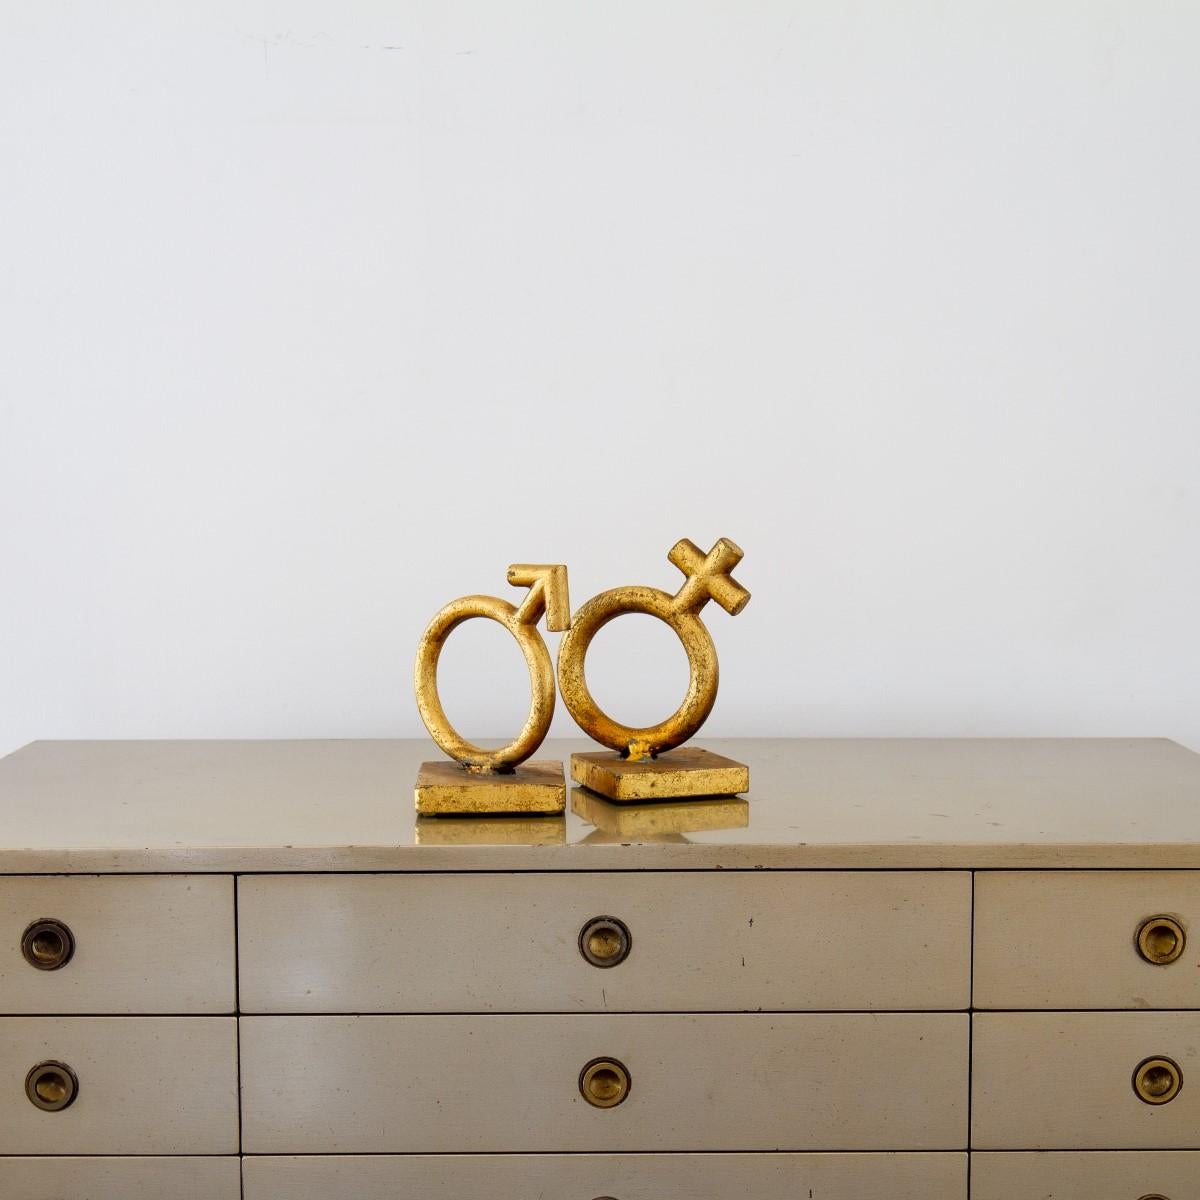 A matched pair of gold leaf cast metal bookends depicting the Mars and Venus gender symbols by Curtis Jere signed and dated 1970.

Curtis Jeré is the collaboration of two metal sculptors Jerry Fels and Curtis Freiler who founded the company